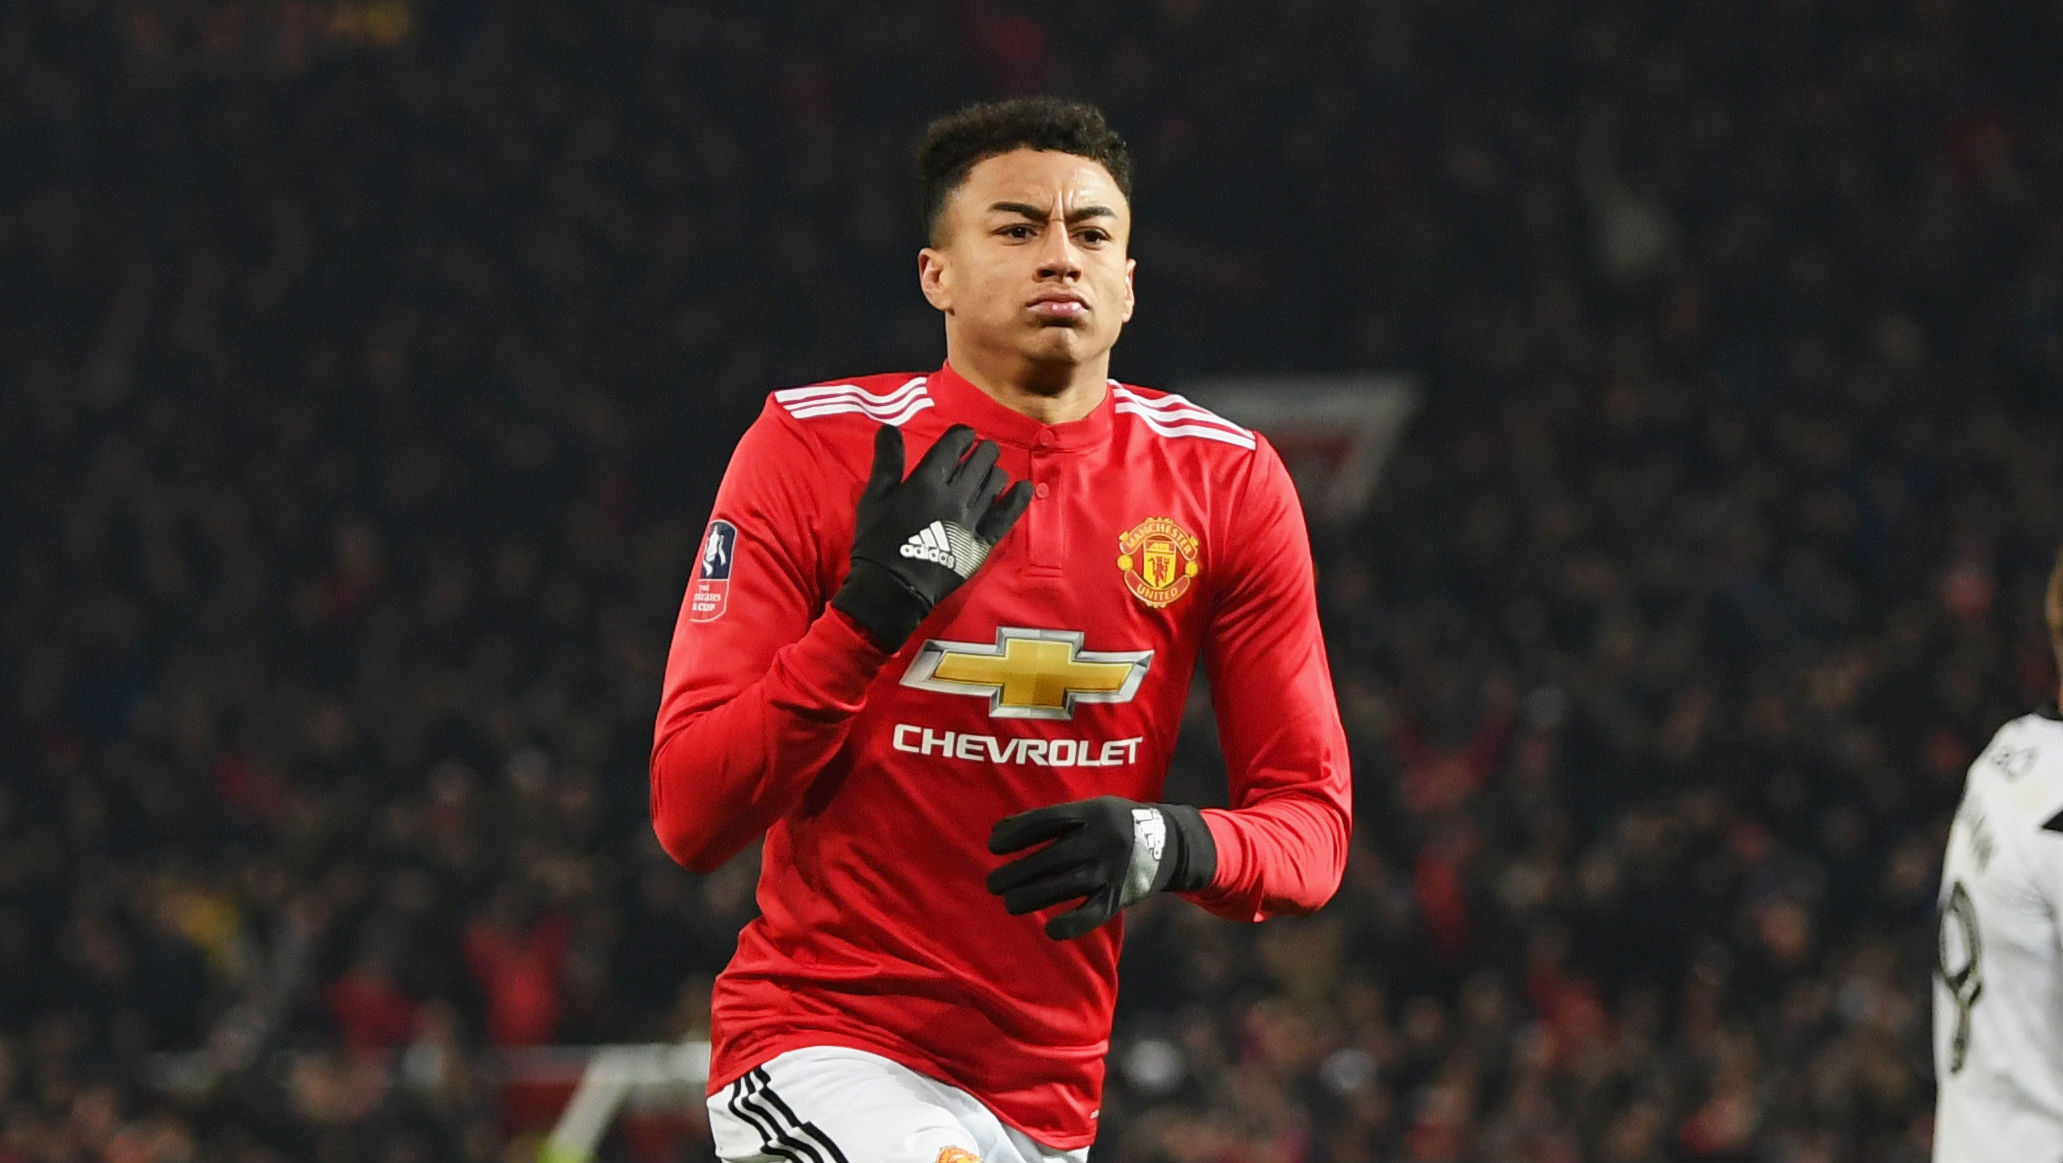 Manchester United legend Paul Scholes expects Ole Gunnar Solskjaer to sell Jesse Lingard in the summer